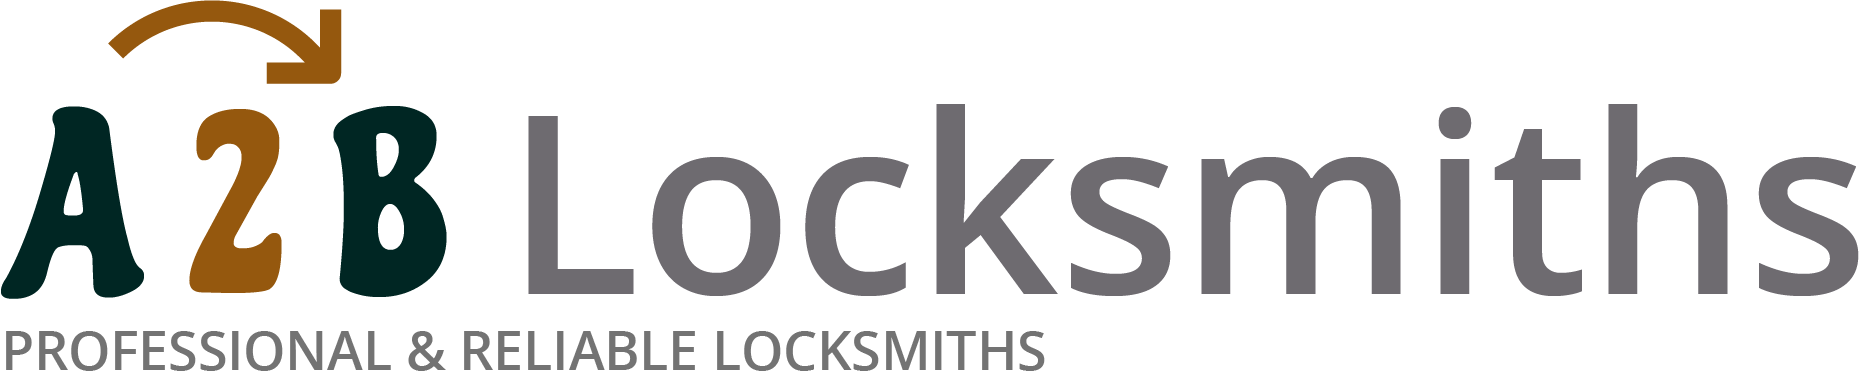 If you are locked out of house in Shepherds Bush, our 24/7 local emergency locksmith services can help you.